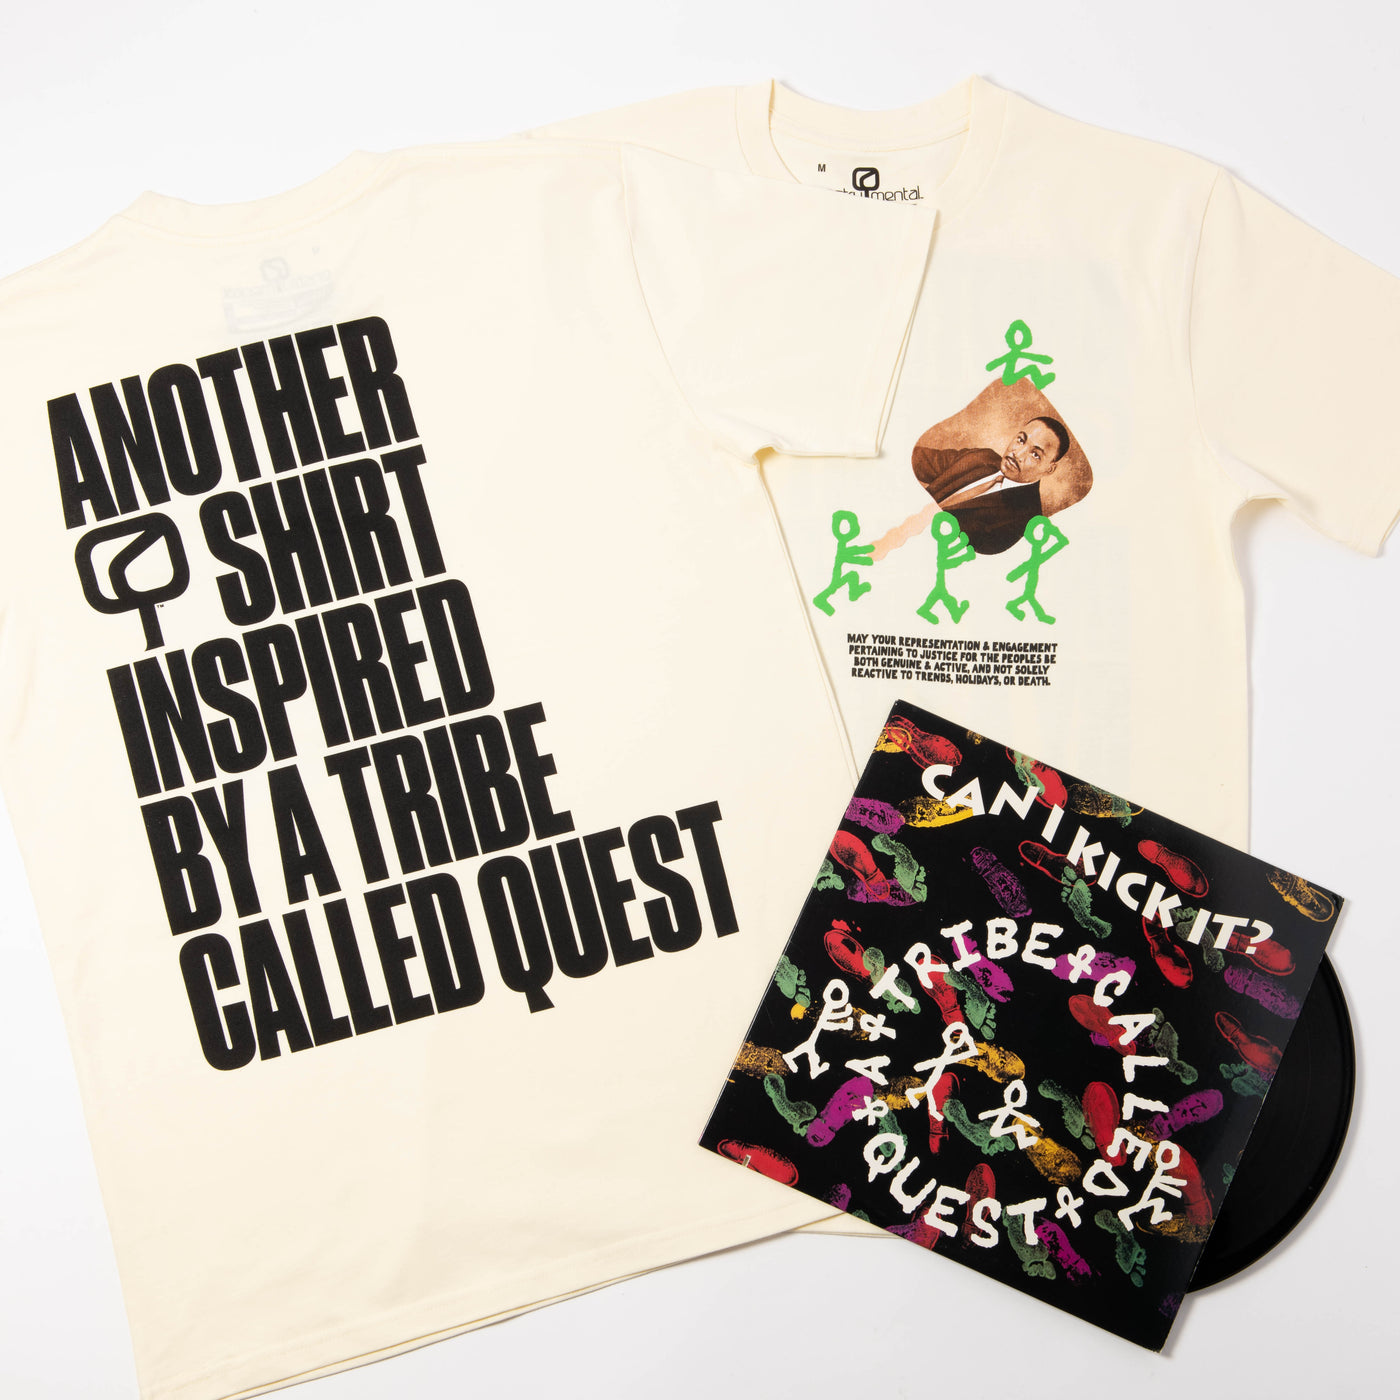 ANOTHER SHIRT INSPIRED BY A TRIBE CALLED QUEST